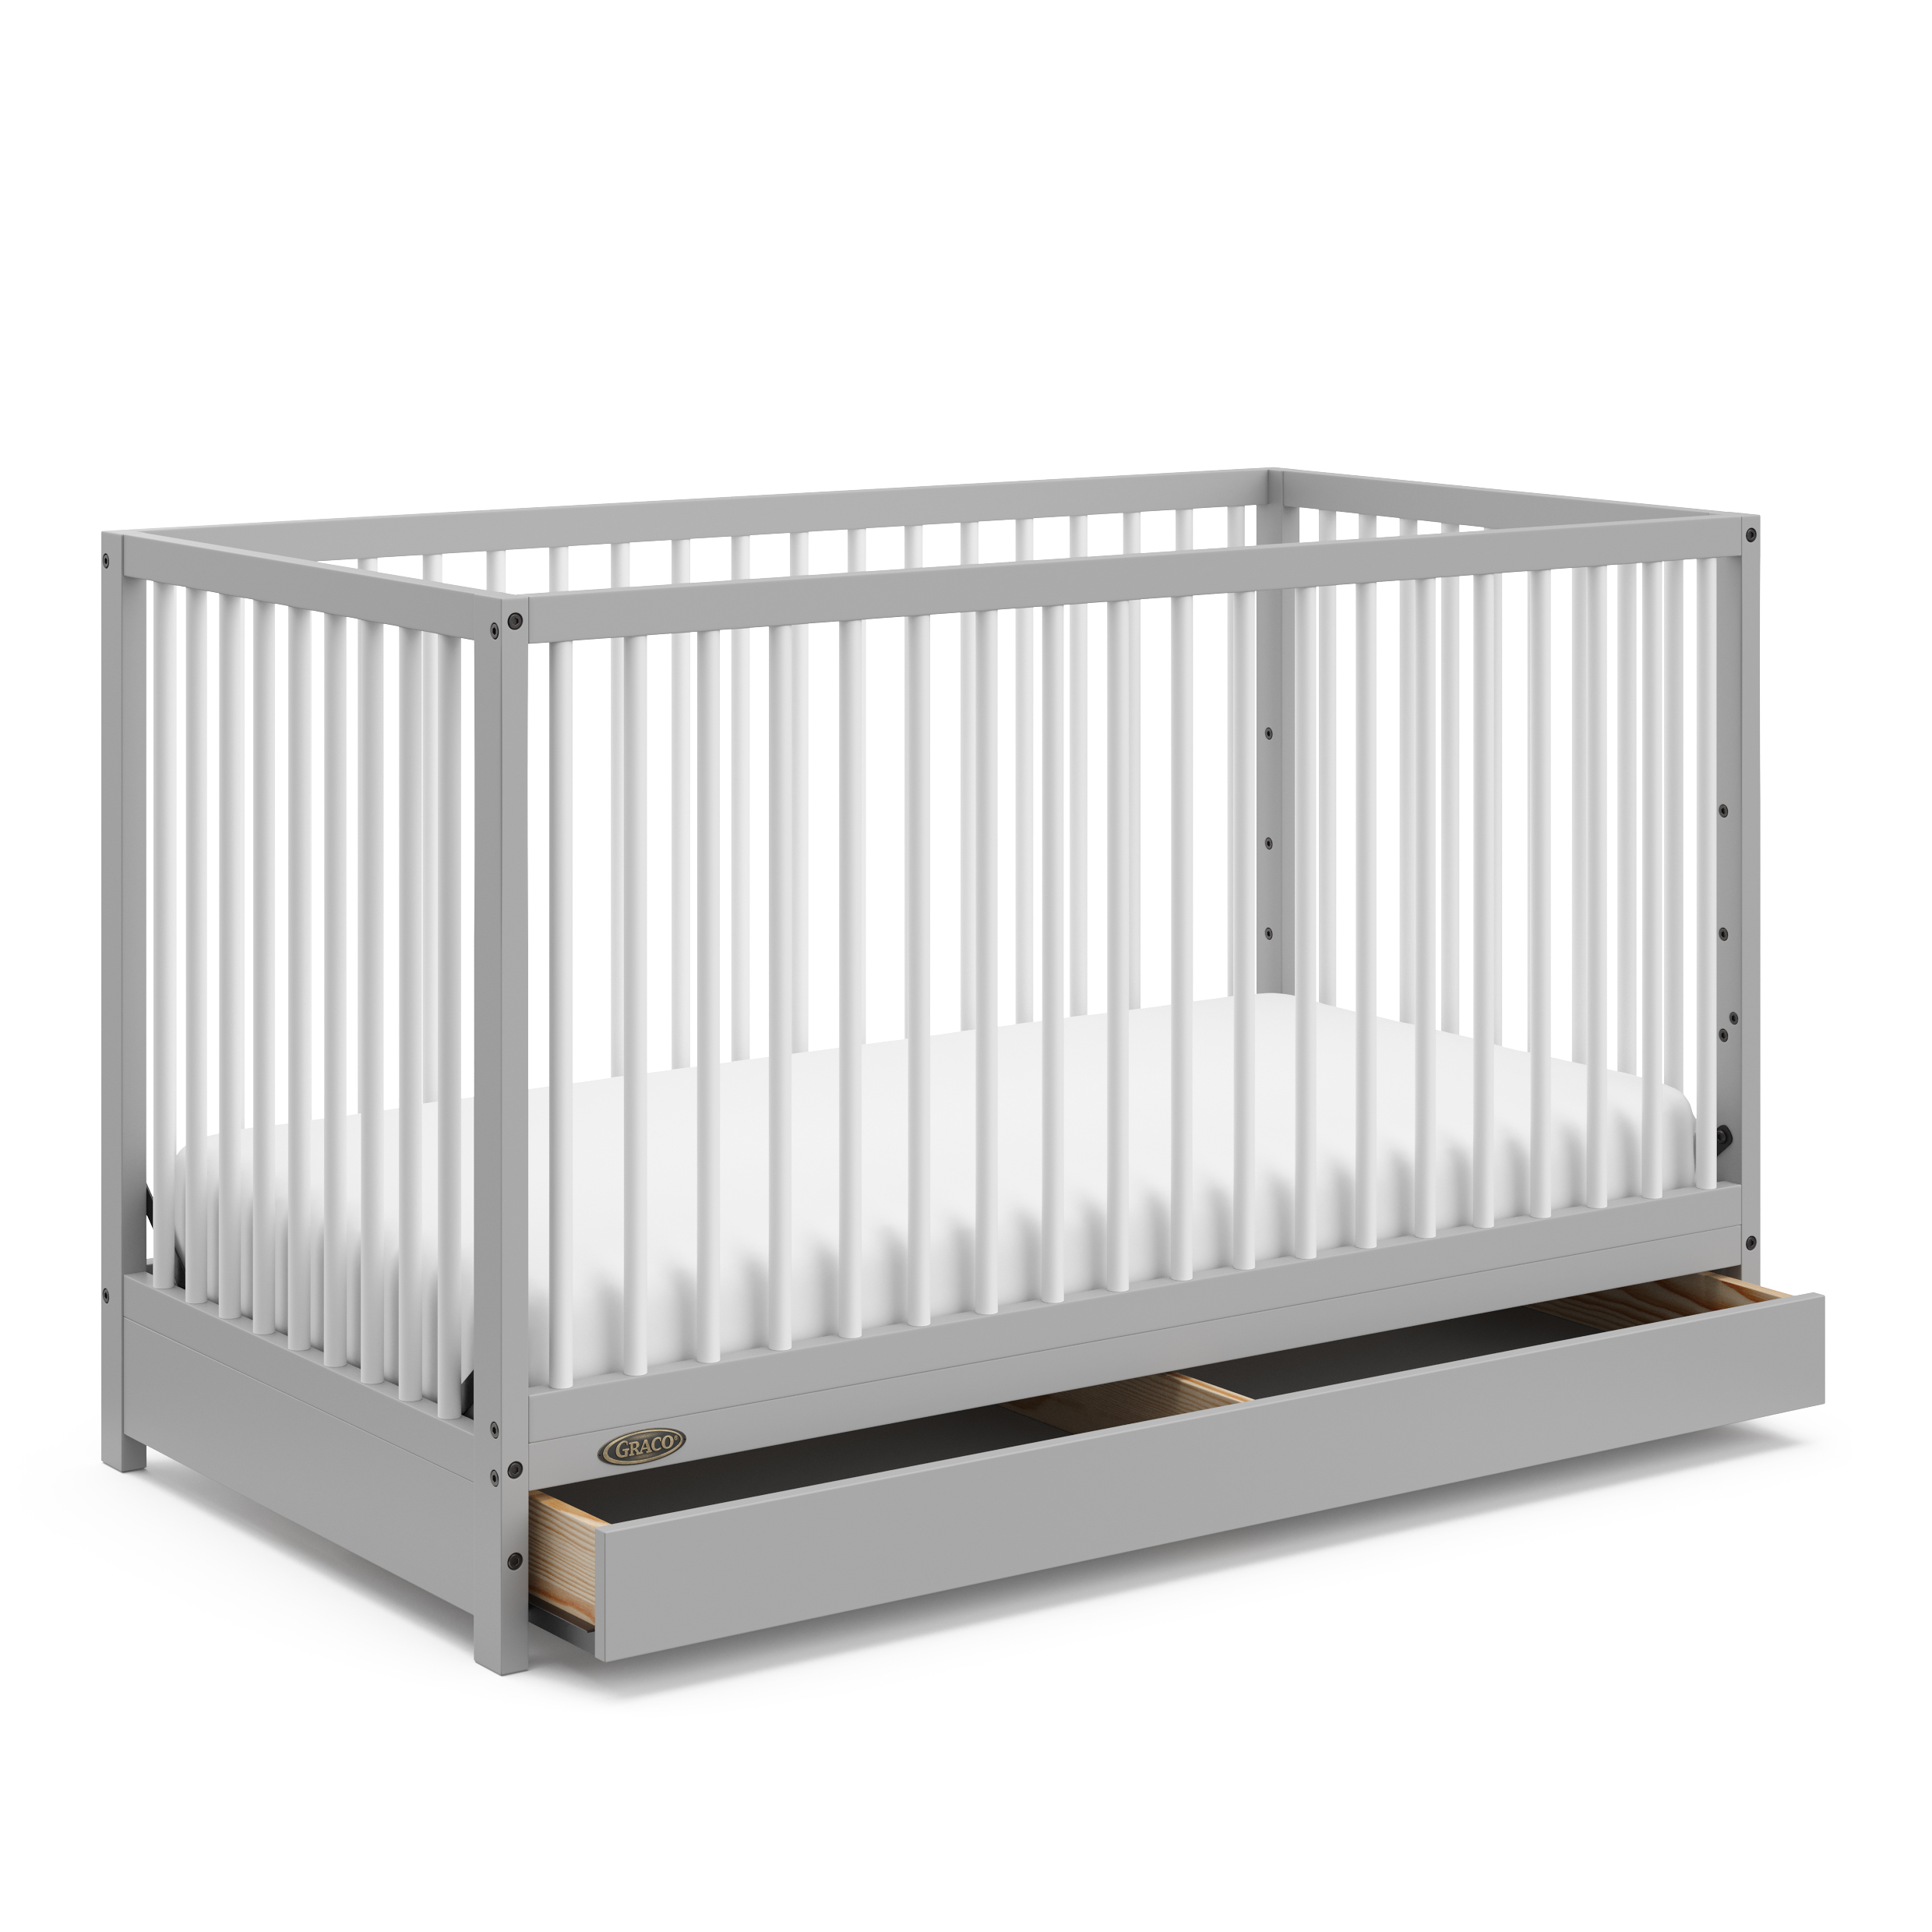 Graco Teddi 5-in-1 Convertible Baby Crib with Drawer, Pebble Gray and White - image 1 of 14